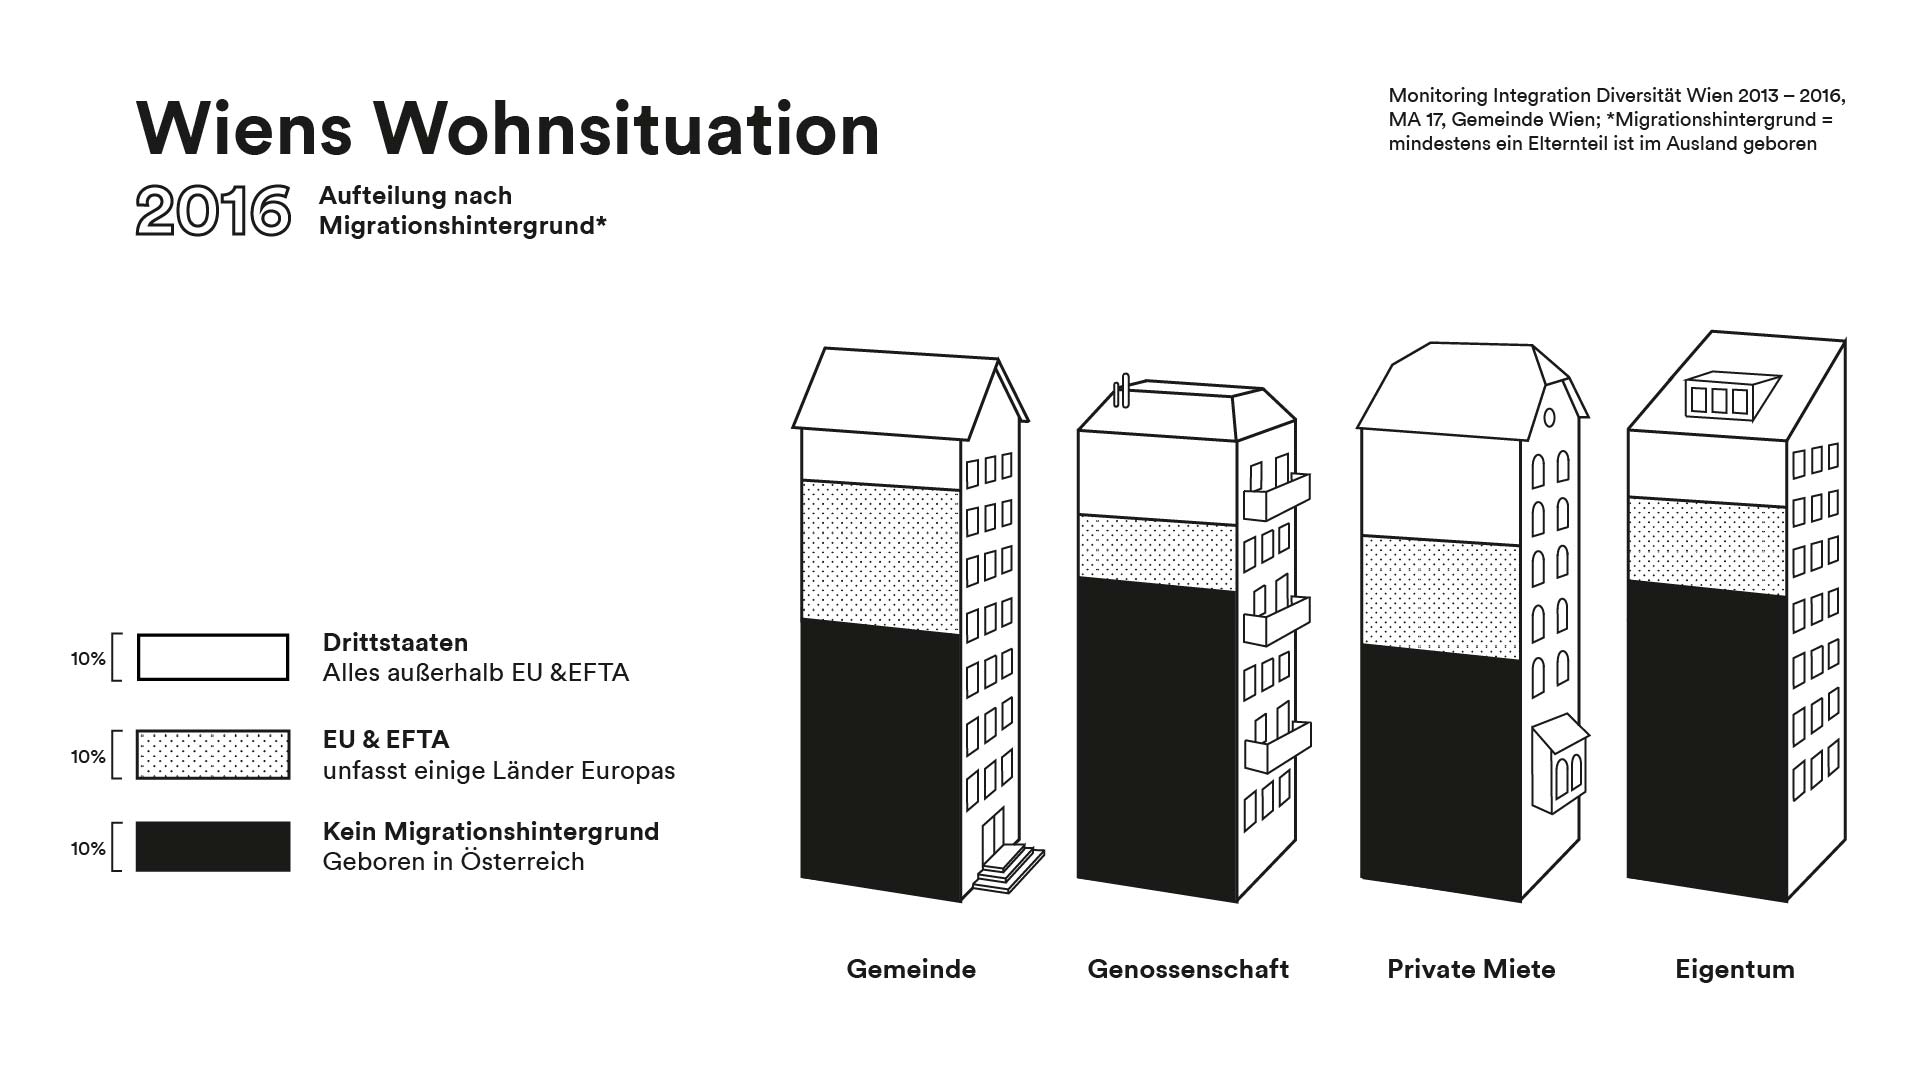 01_wienswohnsituation_01